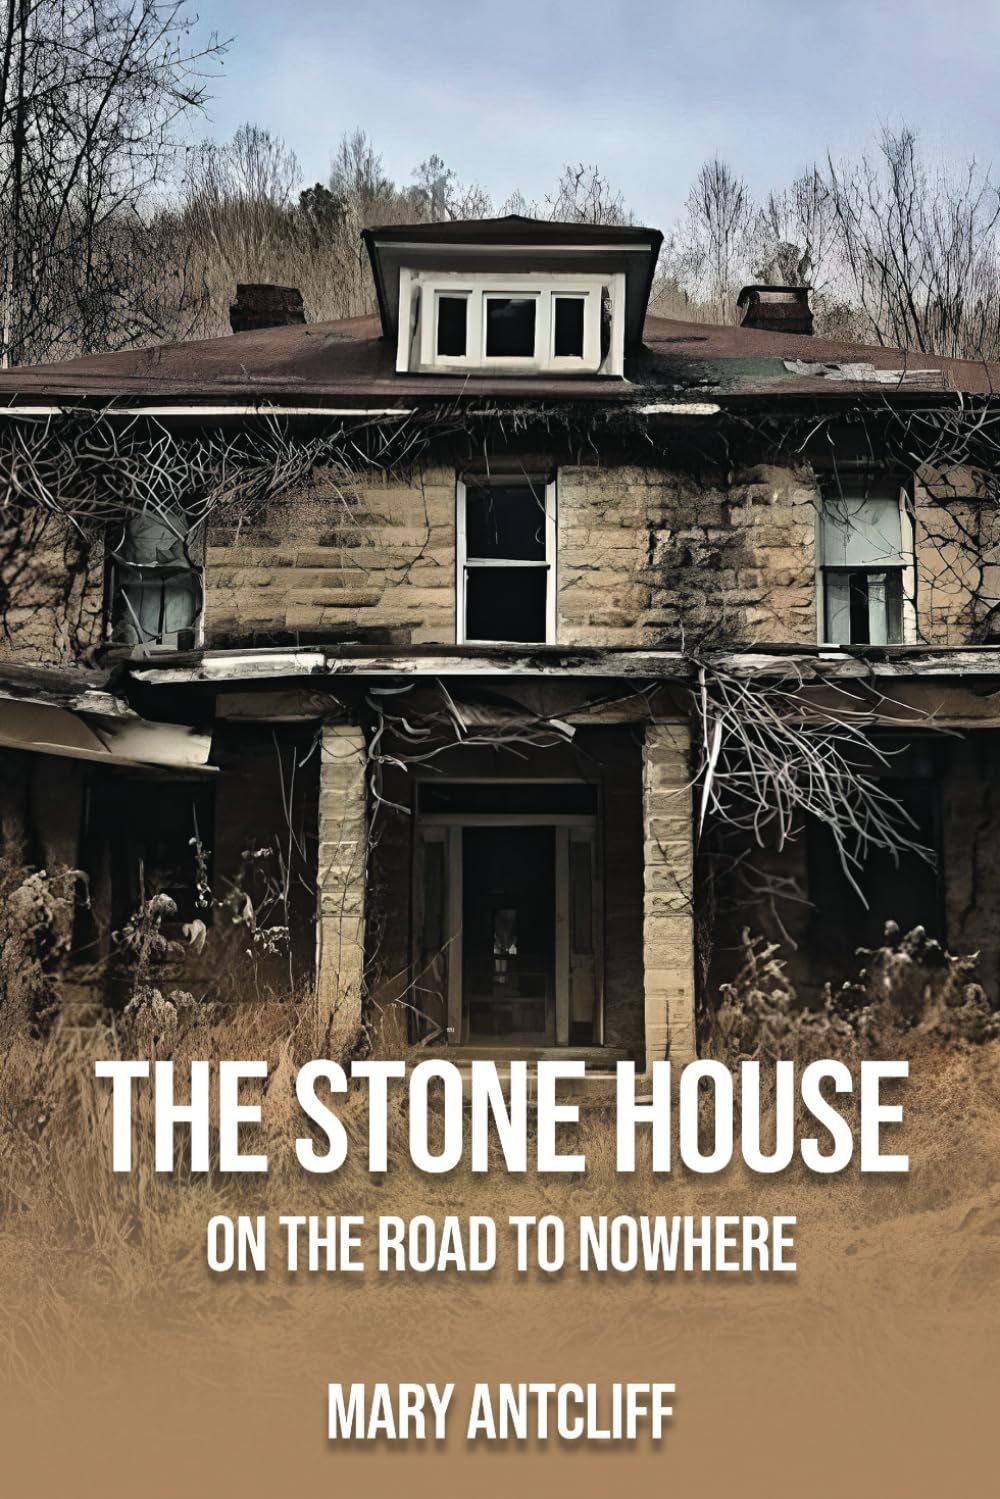 "The Stone House" by Mary Antcliff: A Heartwarming Tale of Transformation and Community